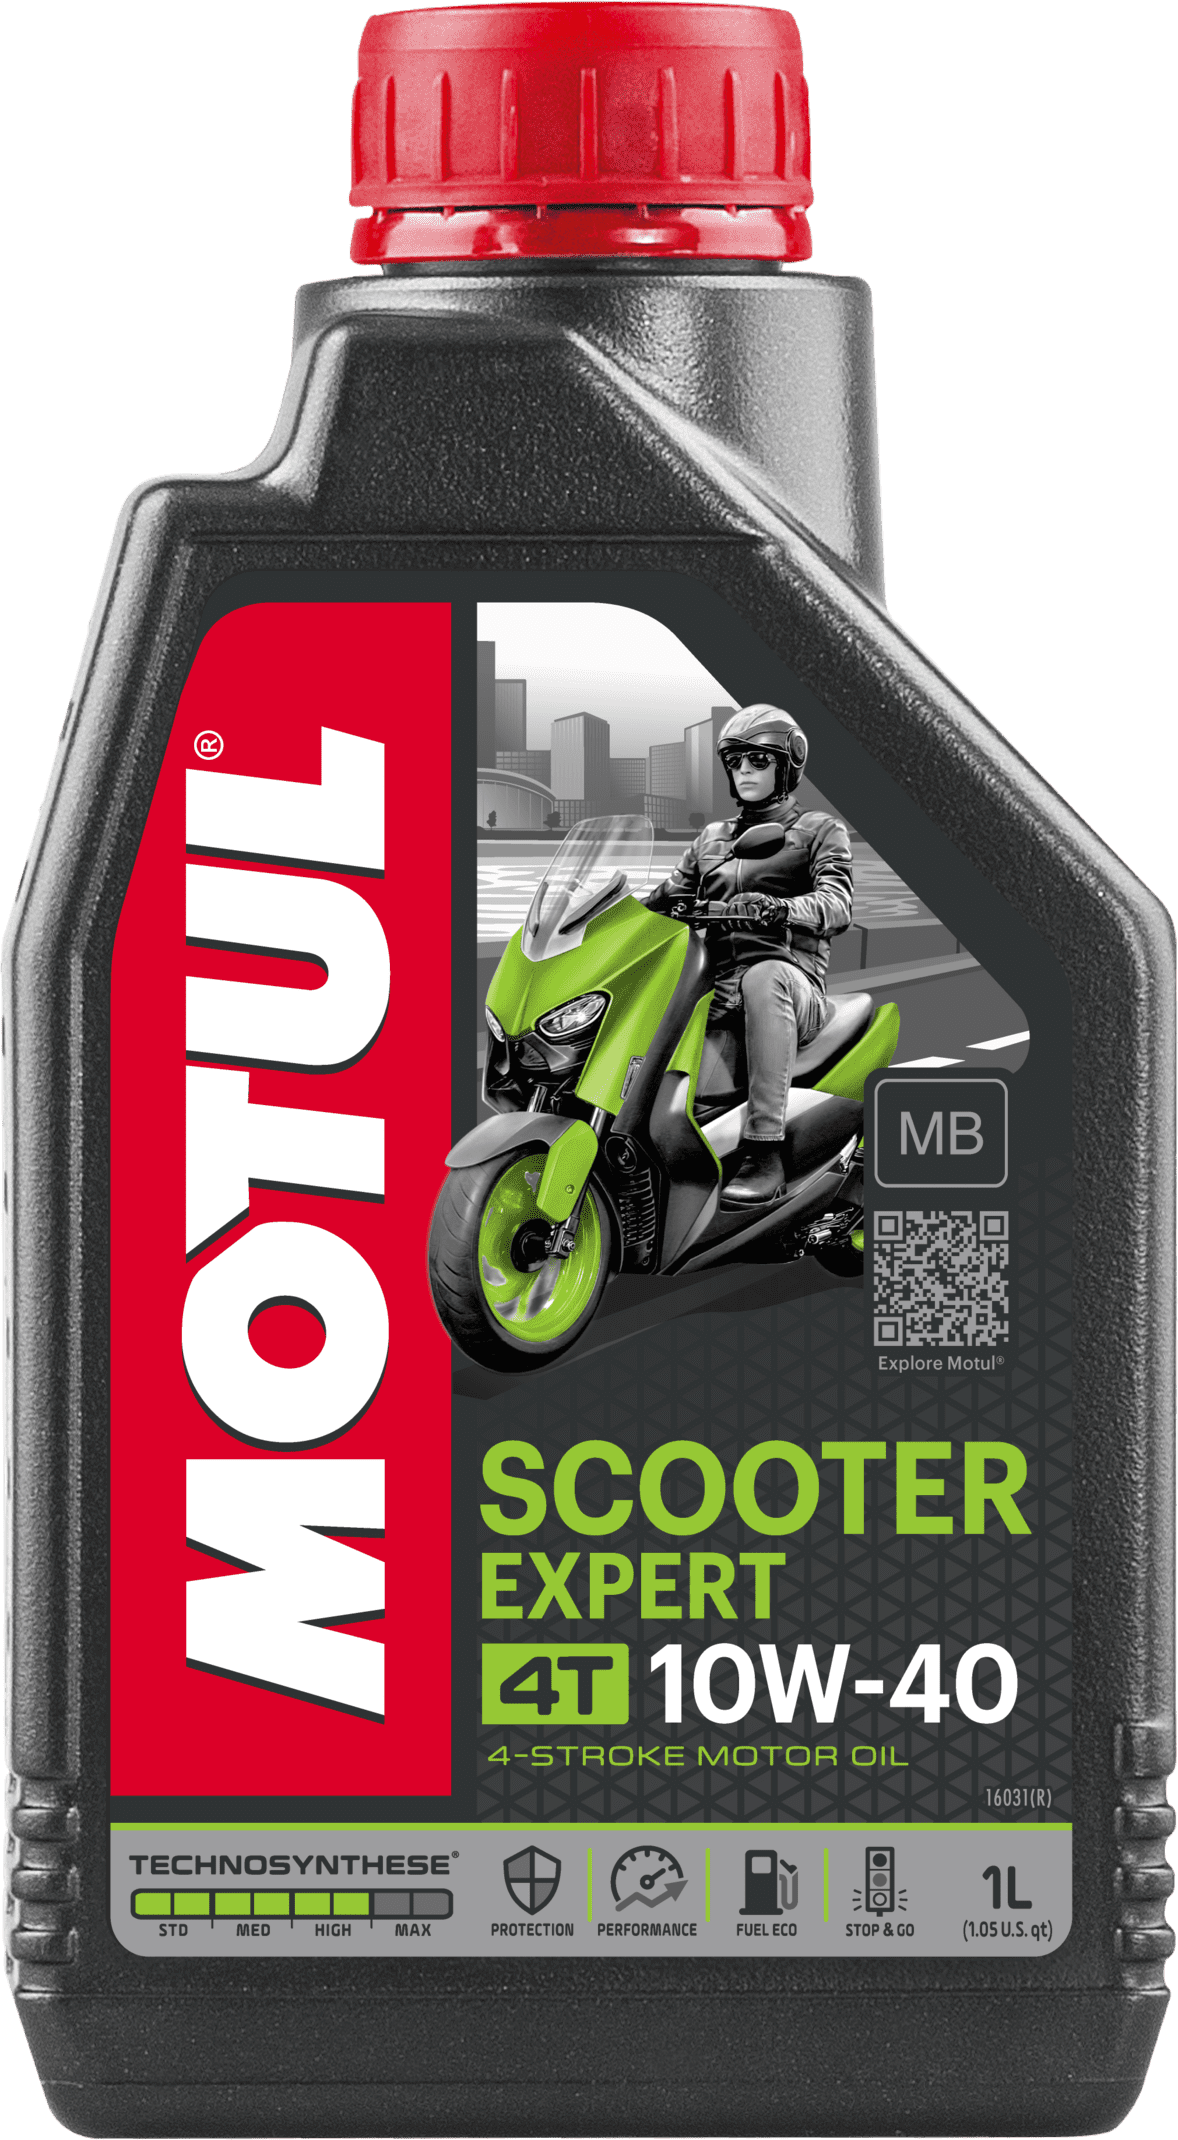 105935-1 Synthetic Technosynthese® lubricant designed to meet today’s 4-Stroke scooter specifcations where a 10W40 viscosity grade and the JASO MB specification are required.